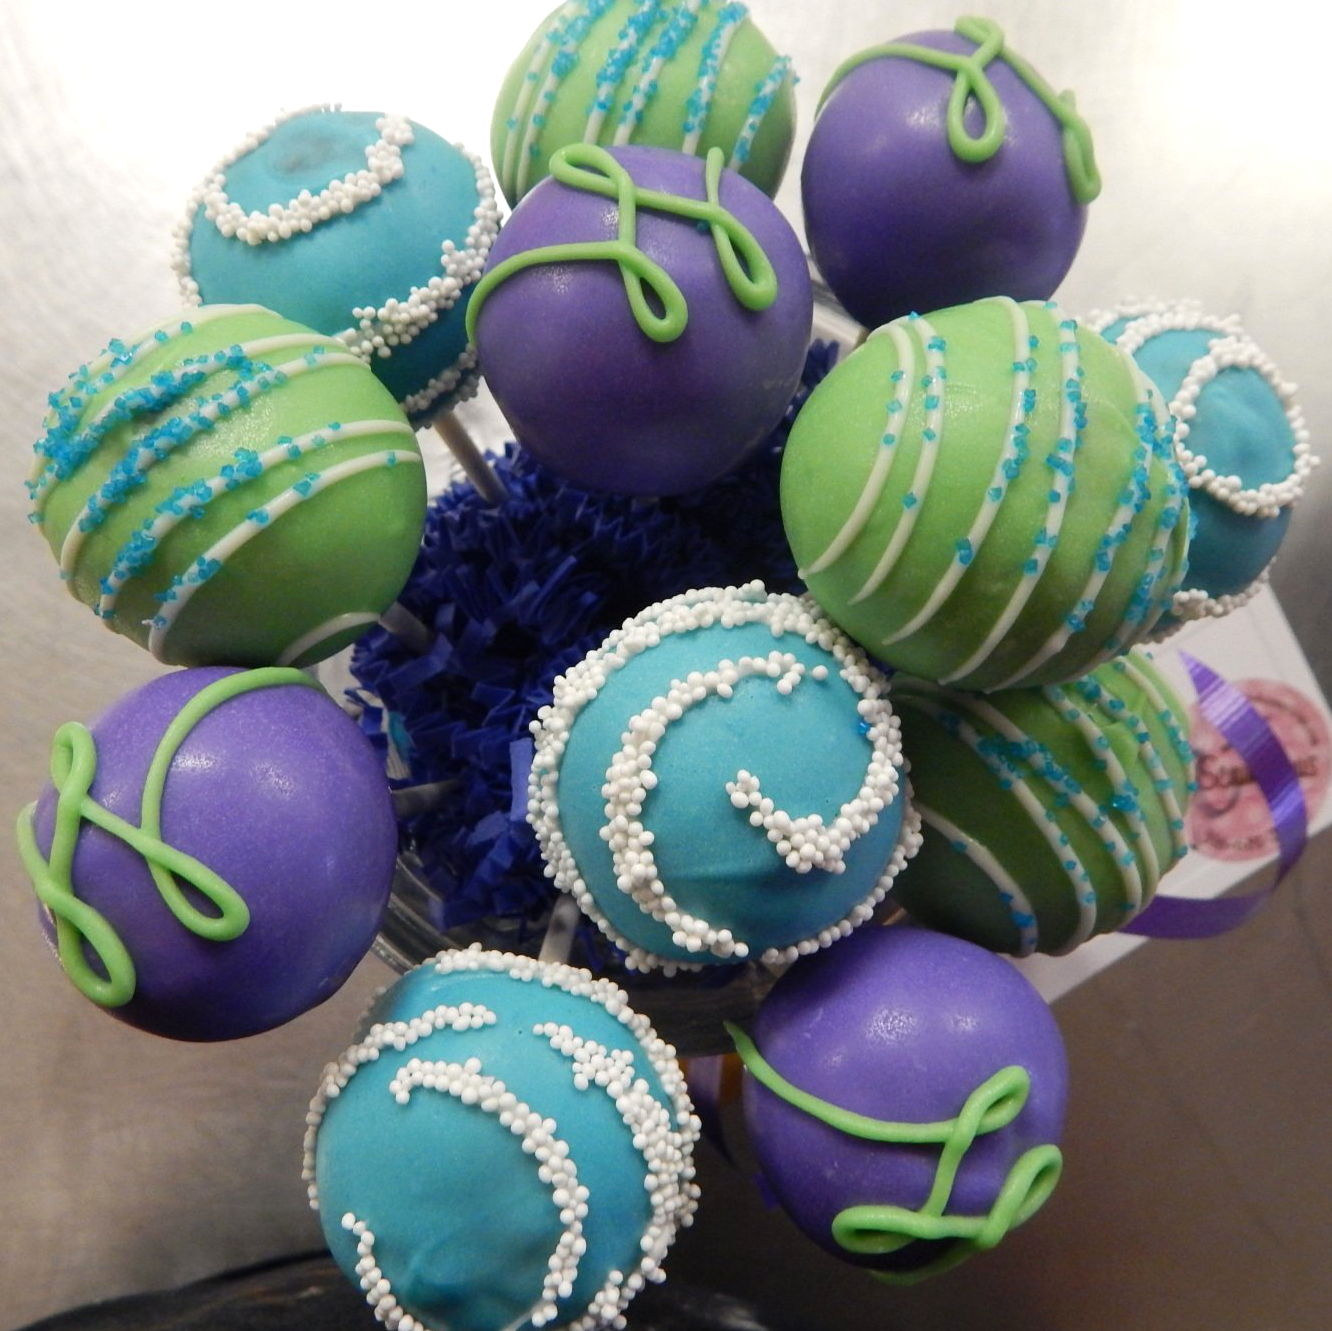 Bouquet of cake pops in green, purple, and blue